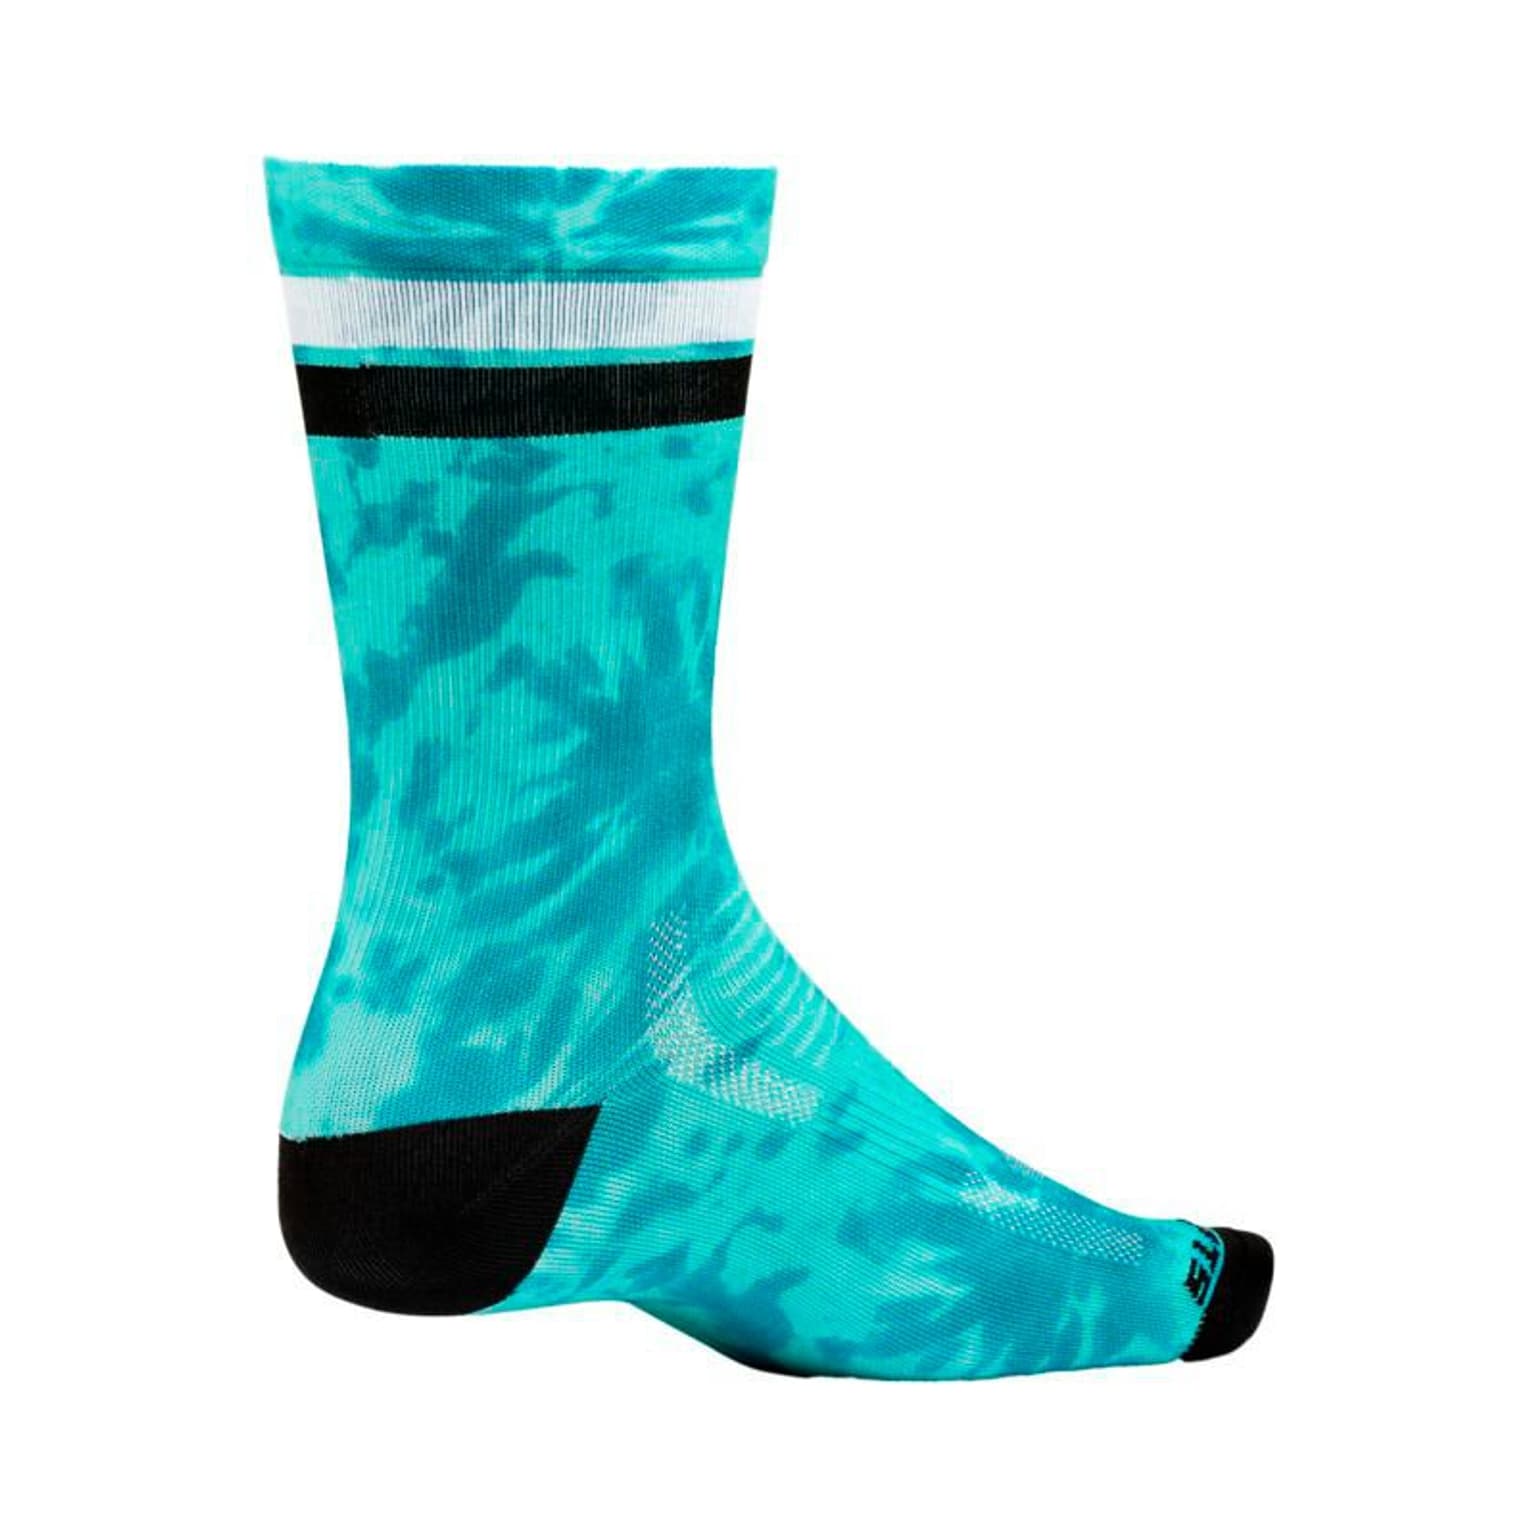 Ride Concepts Ride Concepts Alibi Synthetic Kids Velosocken turquoise 2